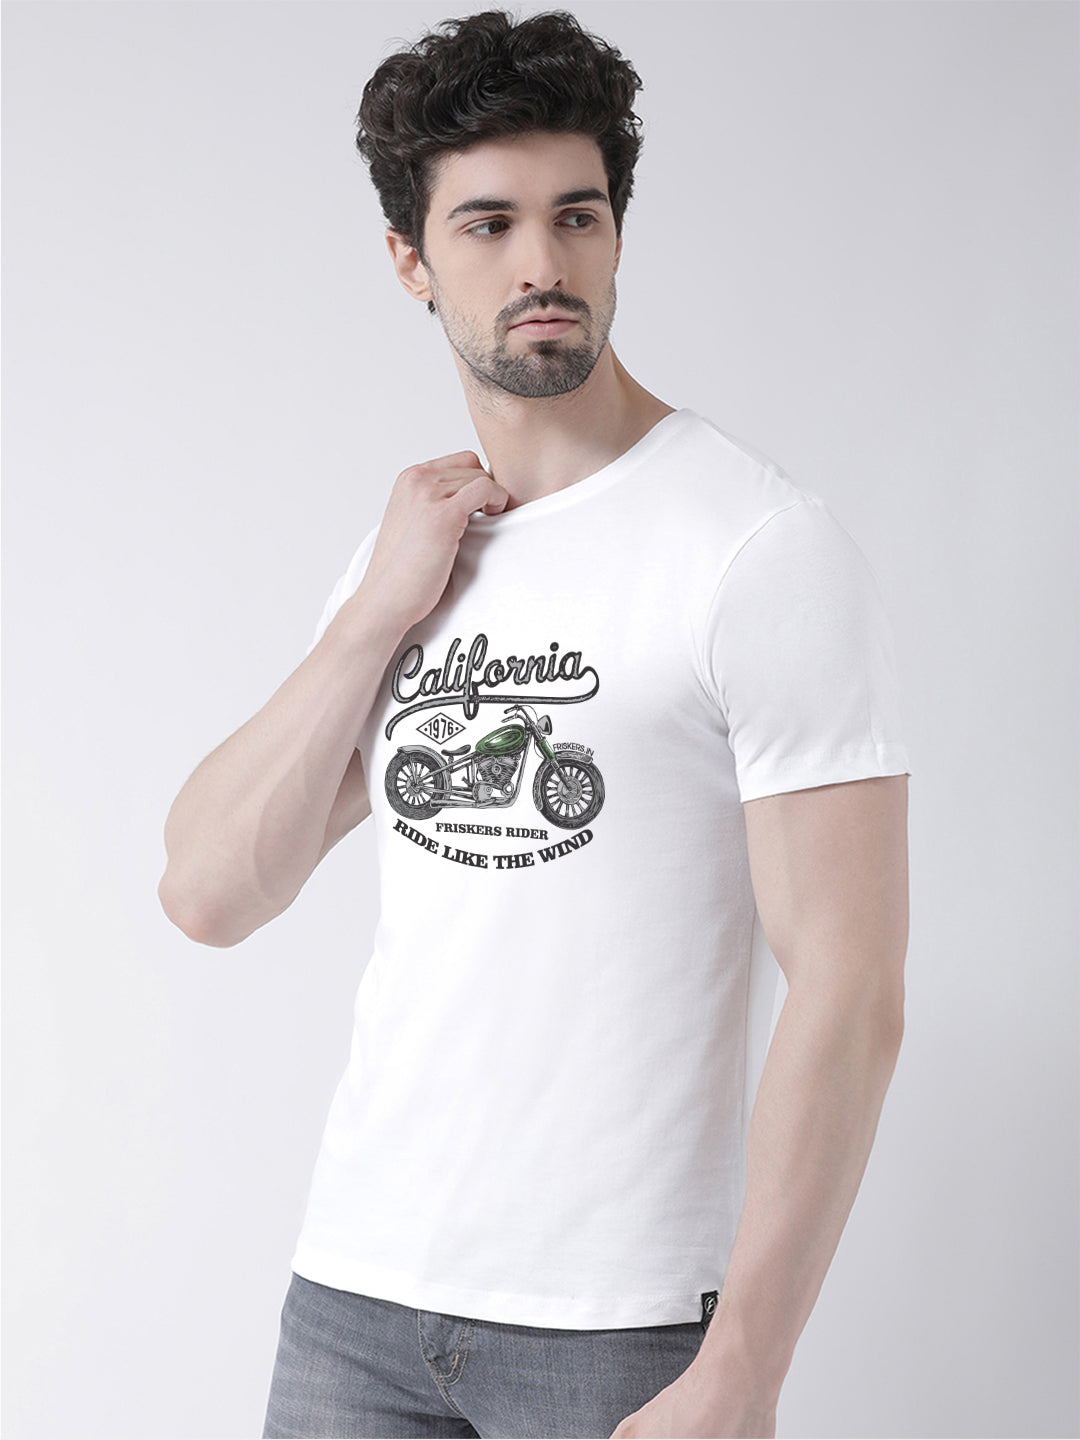 California Printed Round Neck T-shirt - Friskers